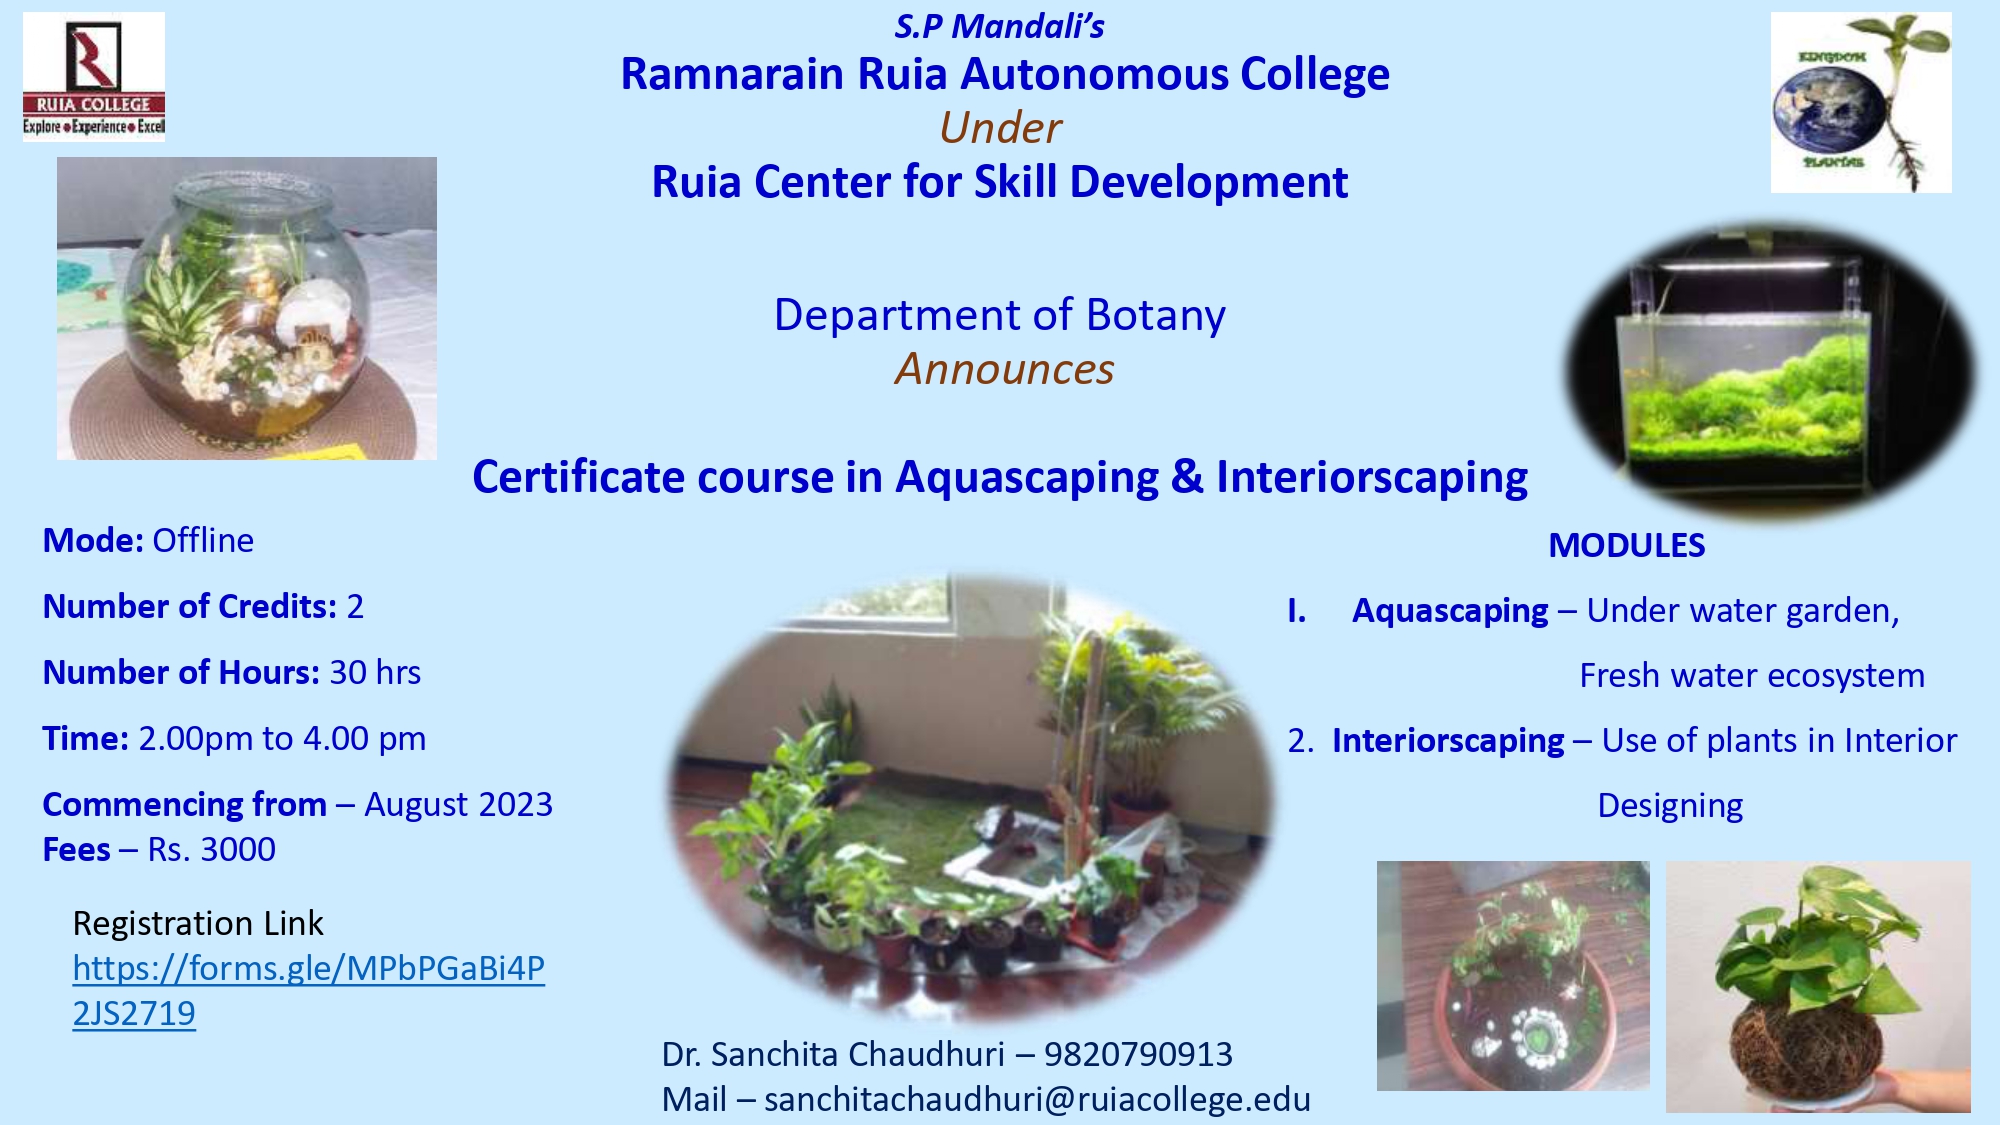 A Certificate course in Aquascaping & Interiorscaping